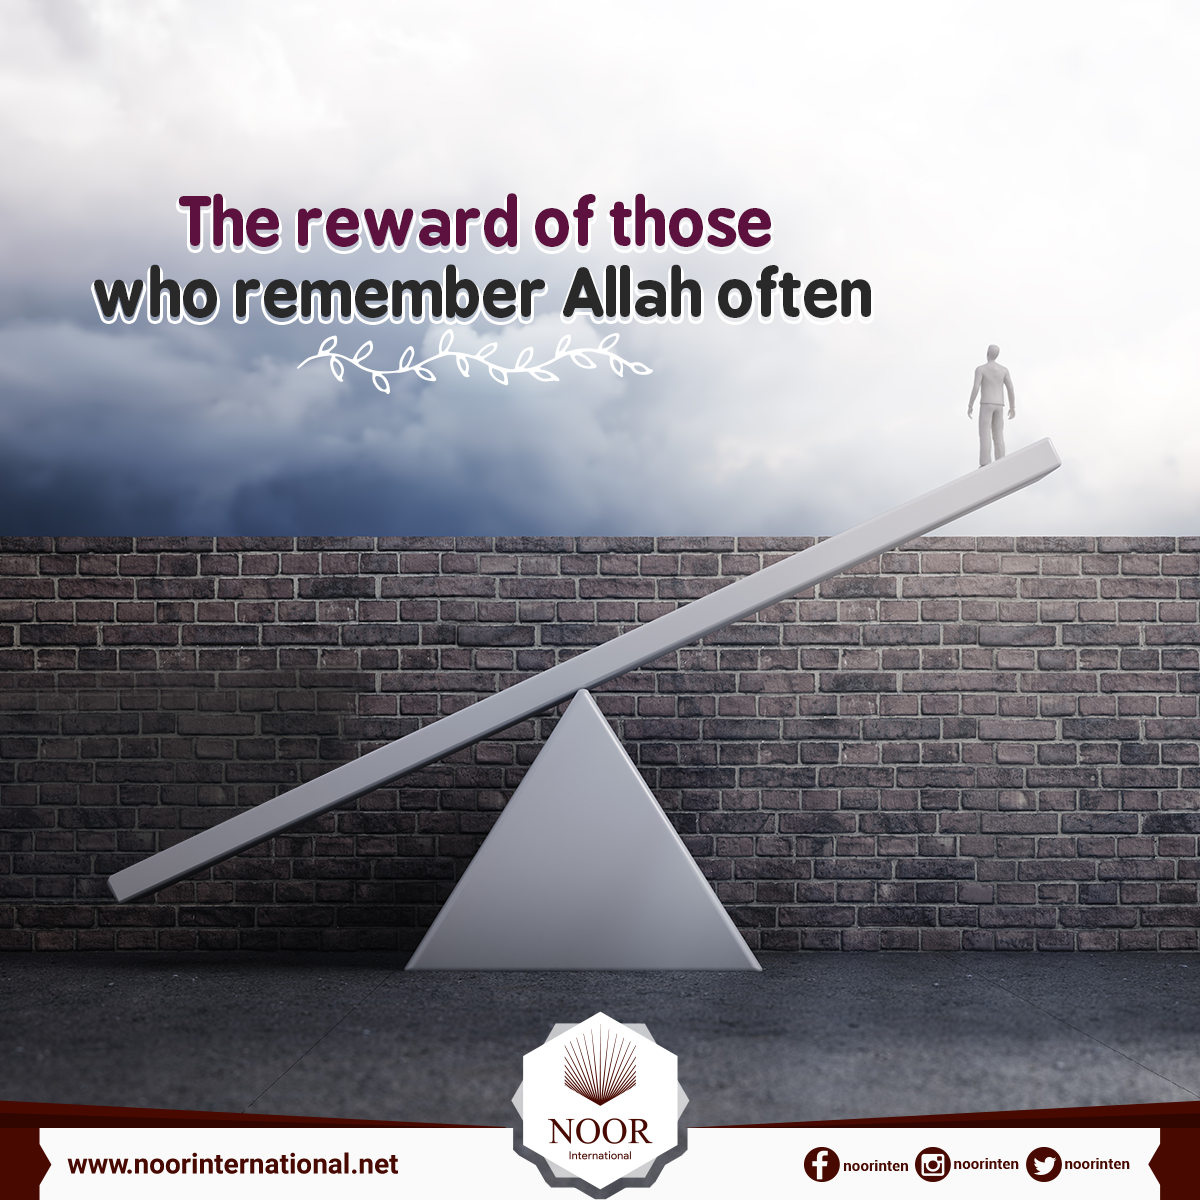 The reward of those who remember Allah often